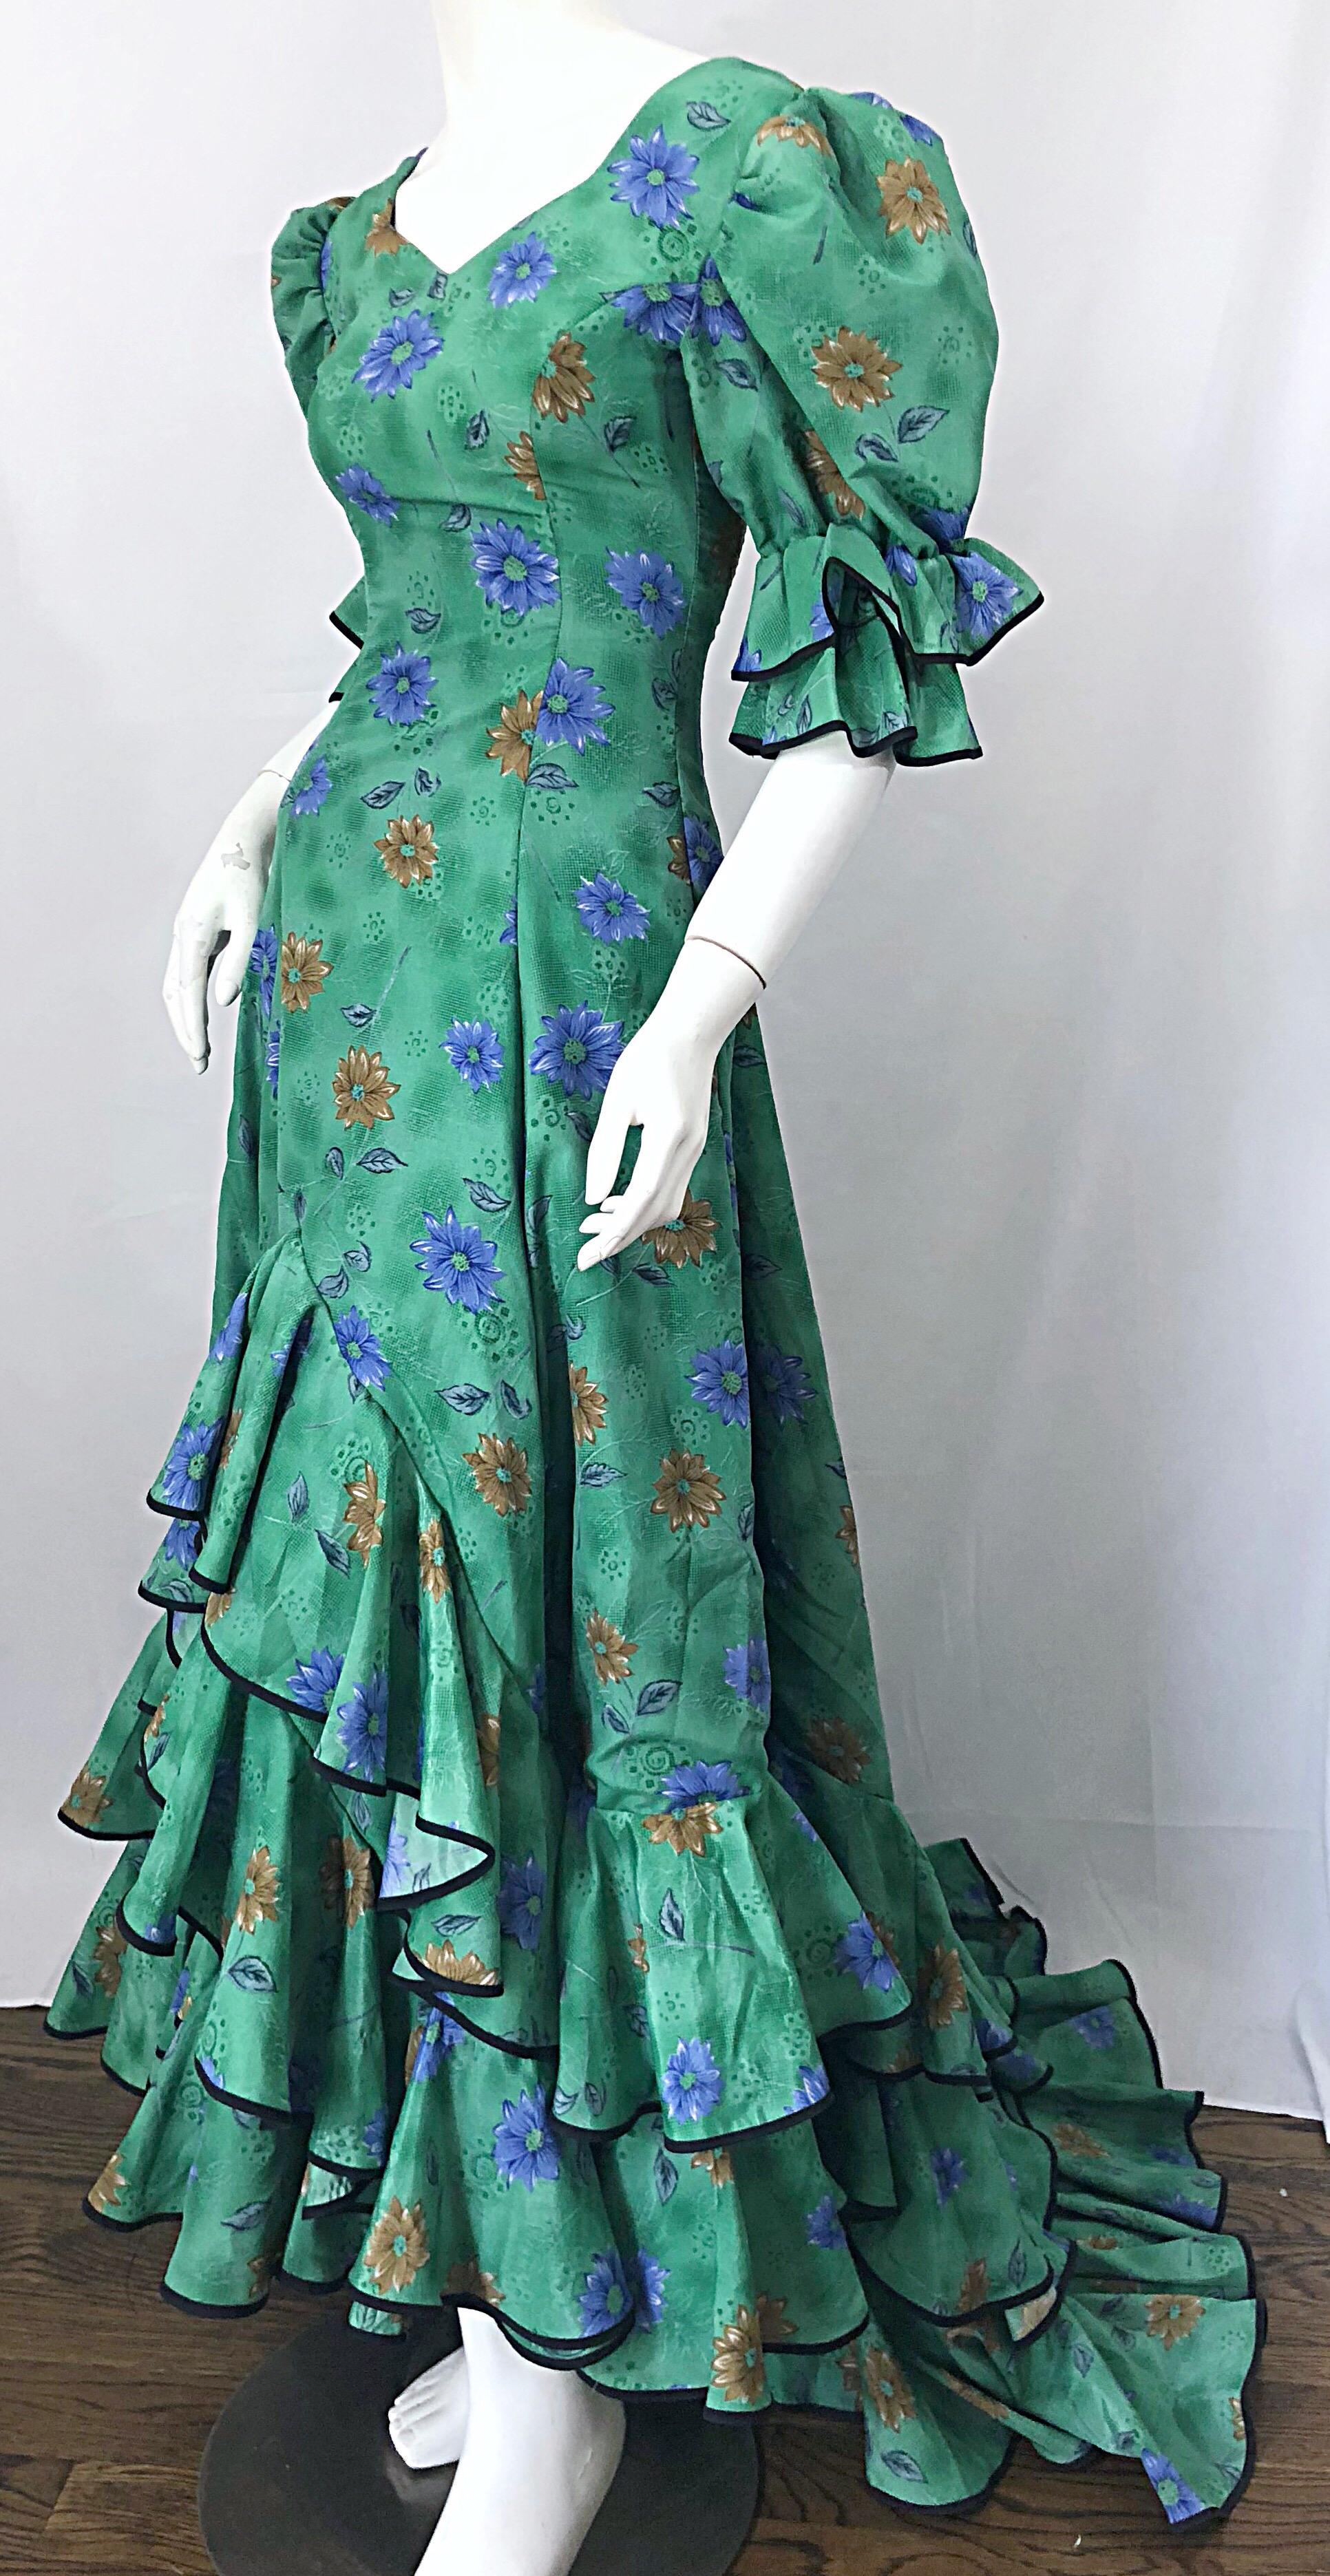 Amazing Vintage Victorian Inspired 1970s Does 1800s Steampunk Green ...